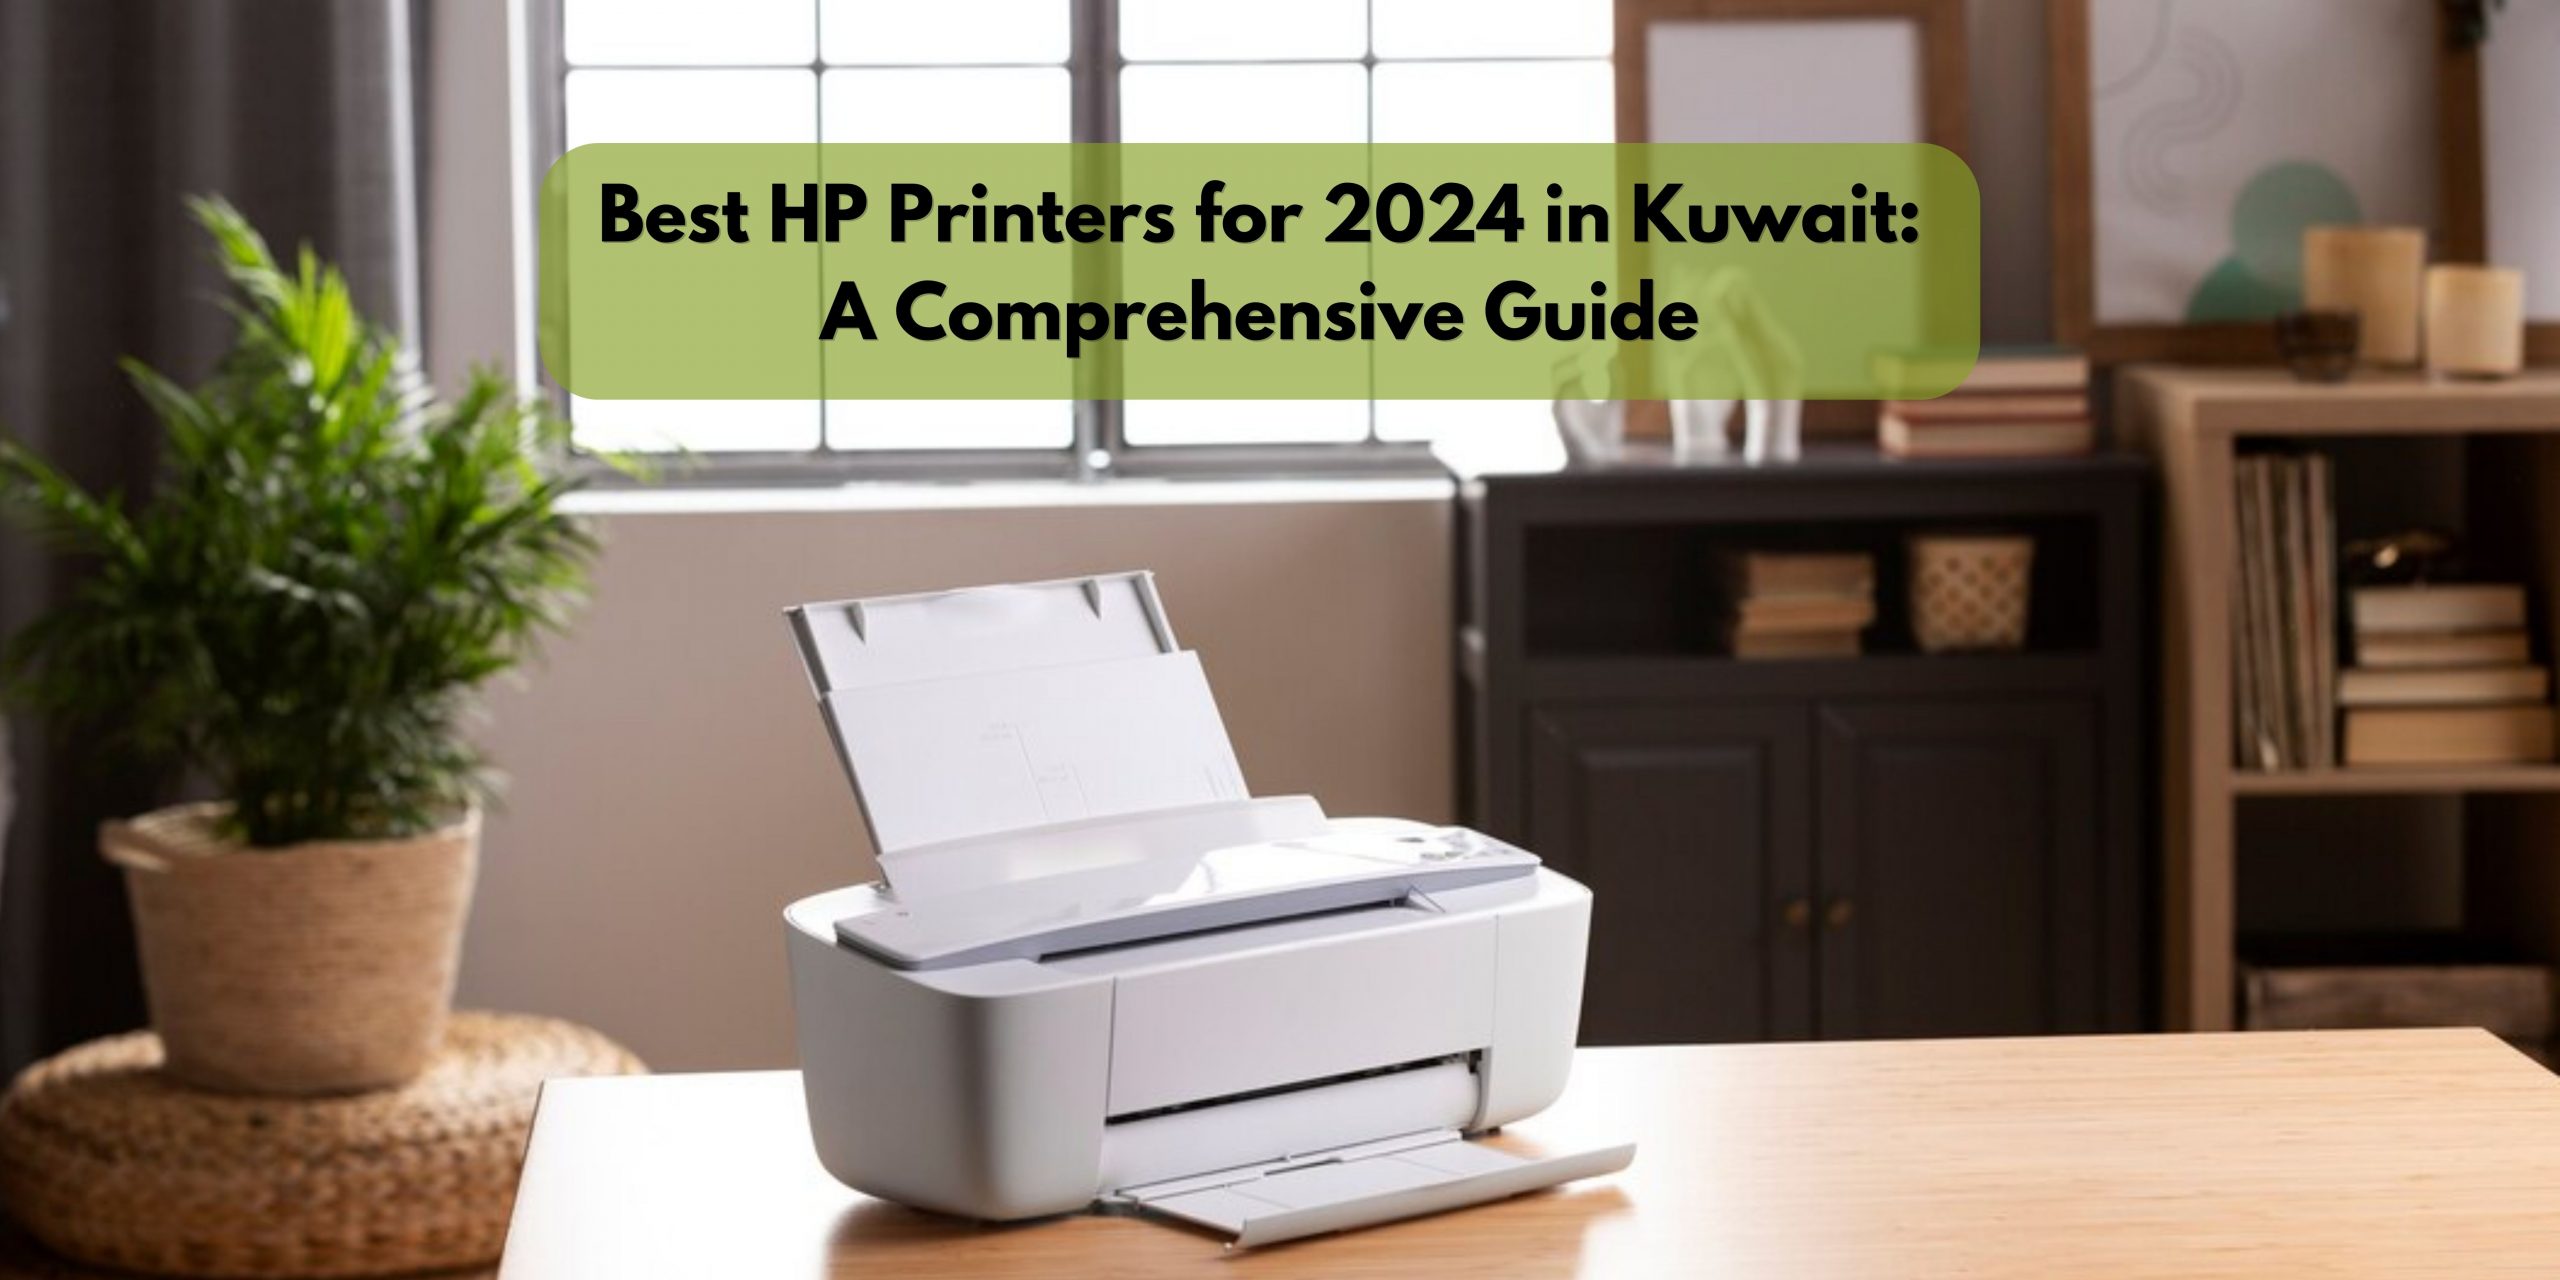 Best HP Printers for 2024 in Kuwait A Comprehensive Guide